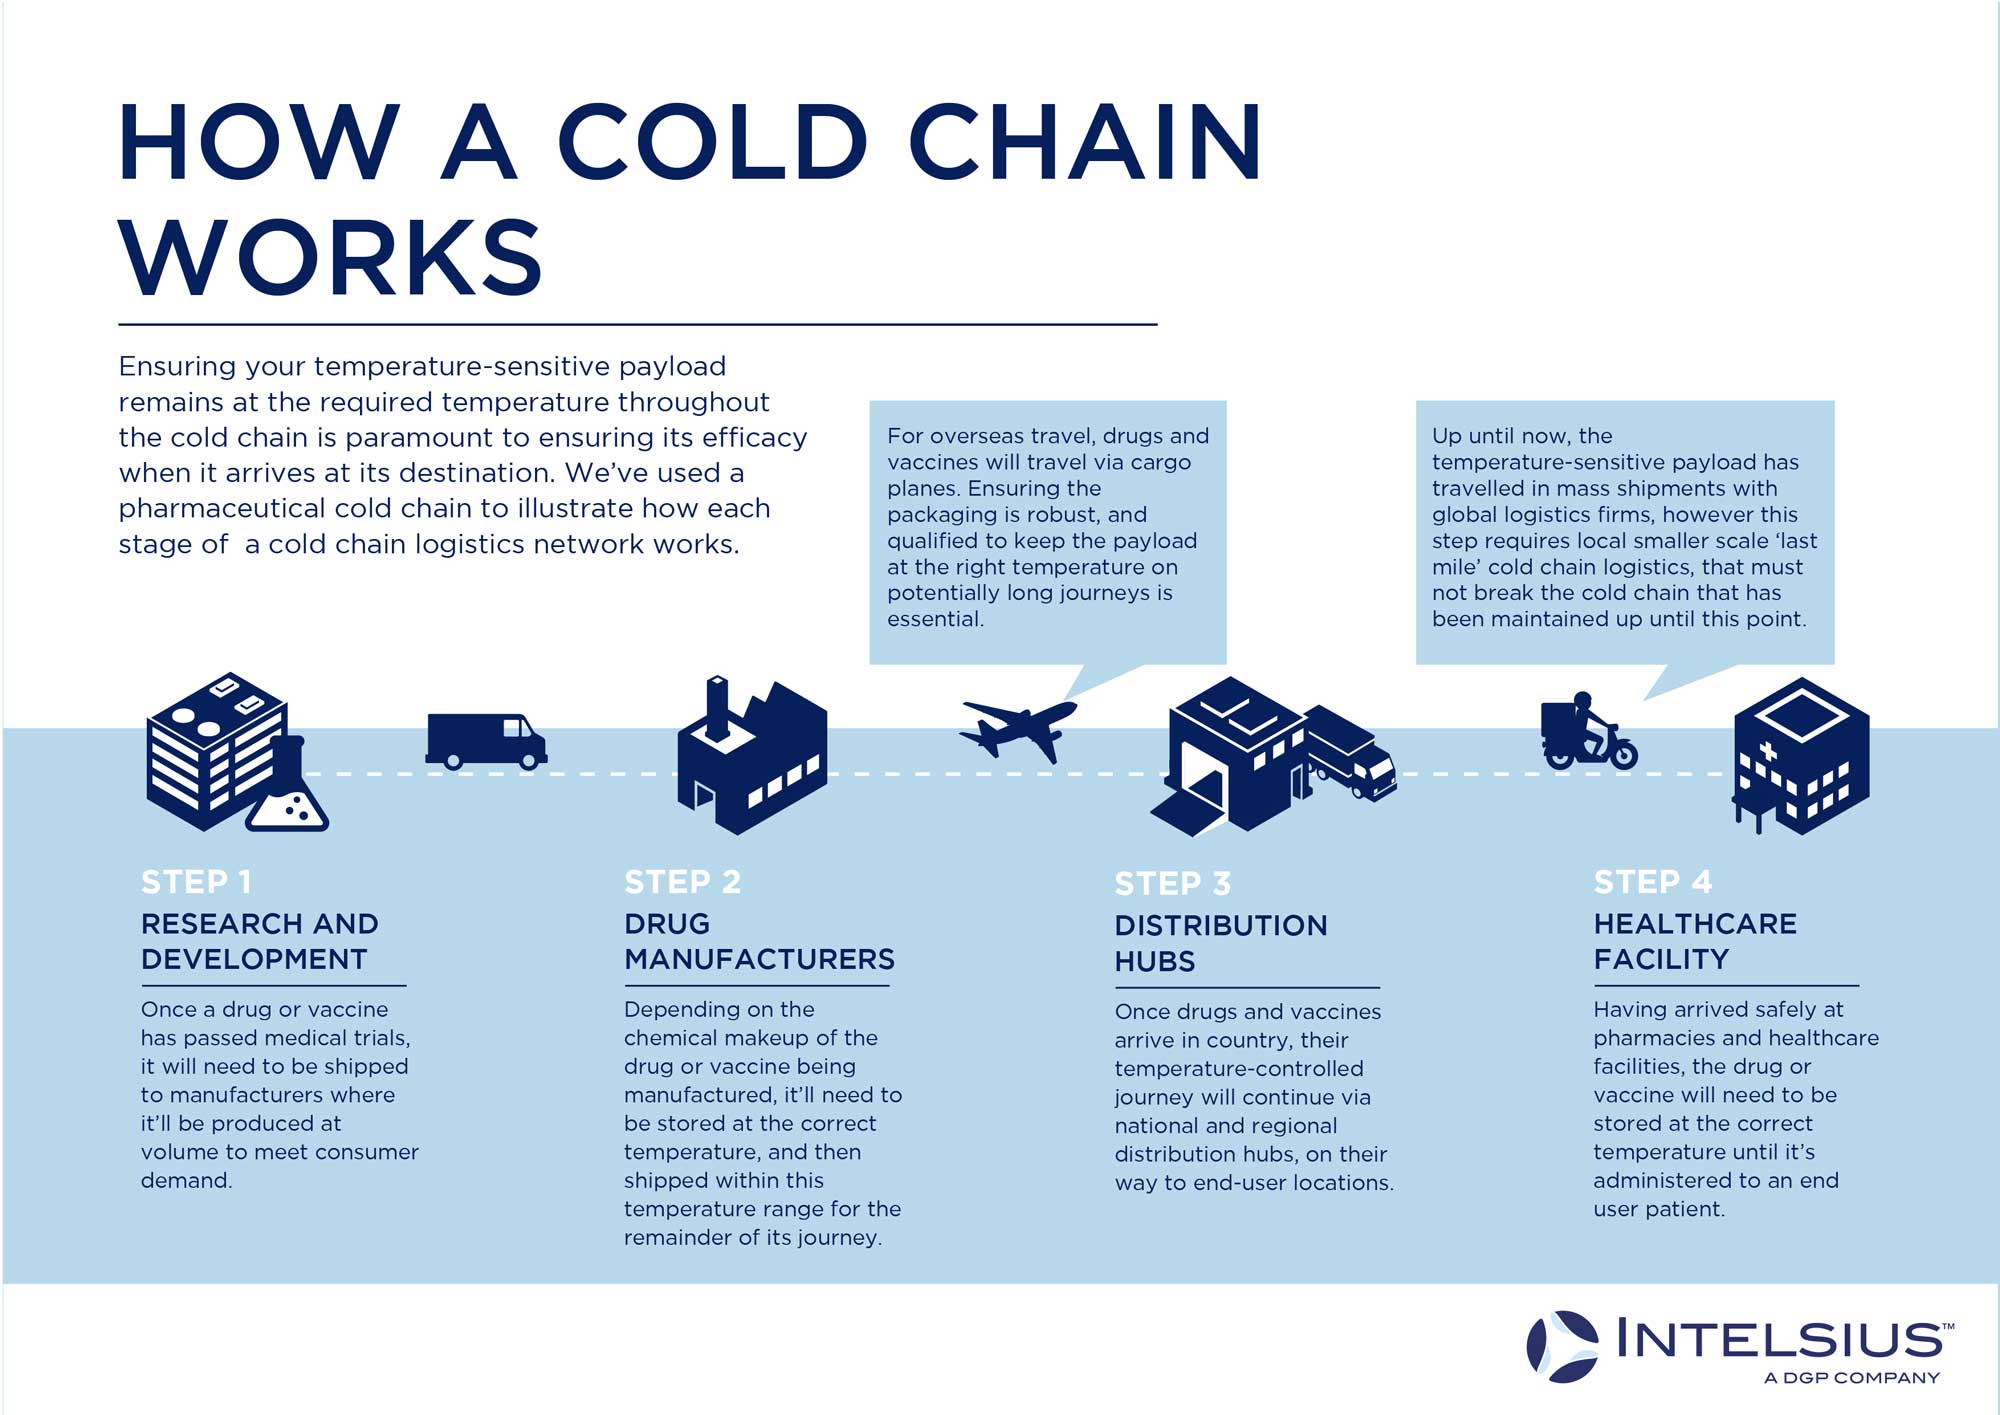 what is a cold chain?